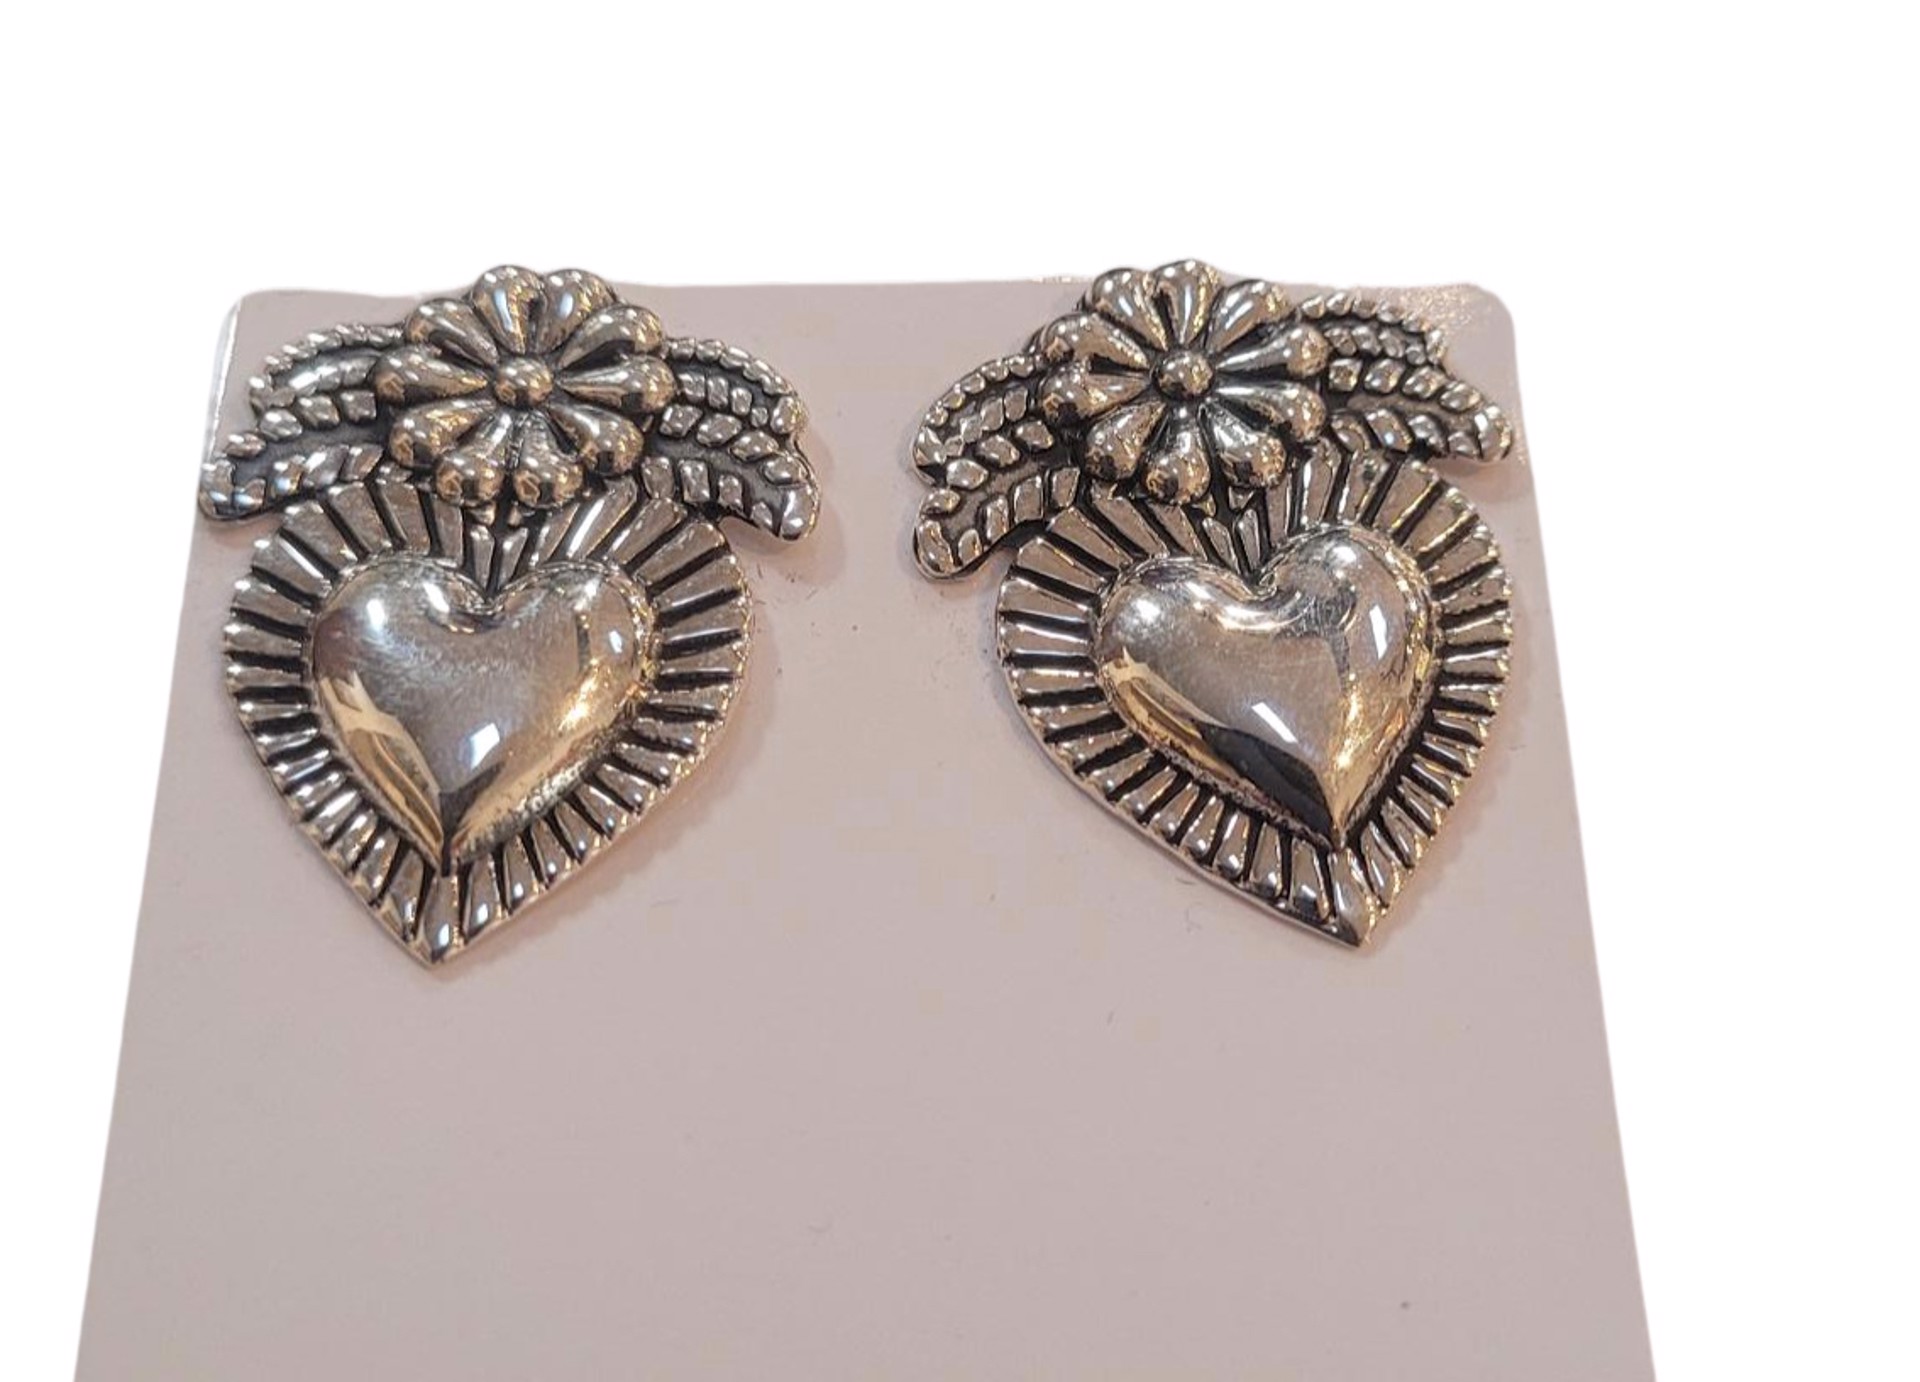 Earrings - Sterling Silver Hearts and Flowers by Indigo Desert Ranch - Jewelry